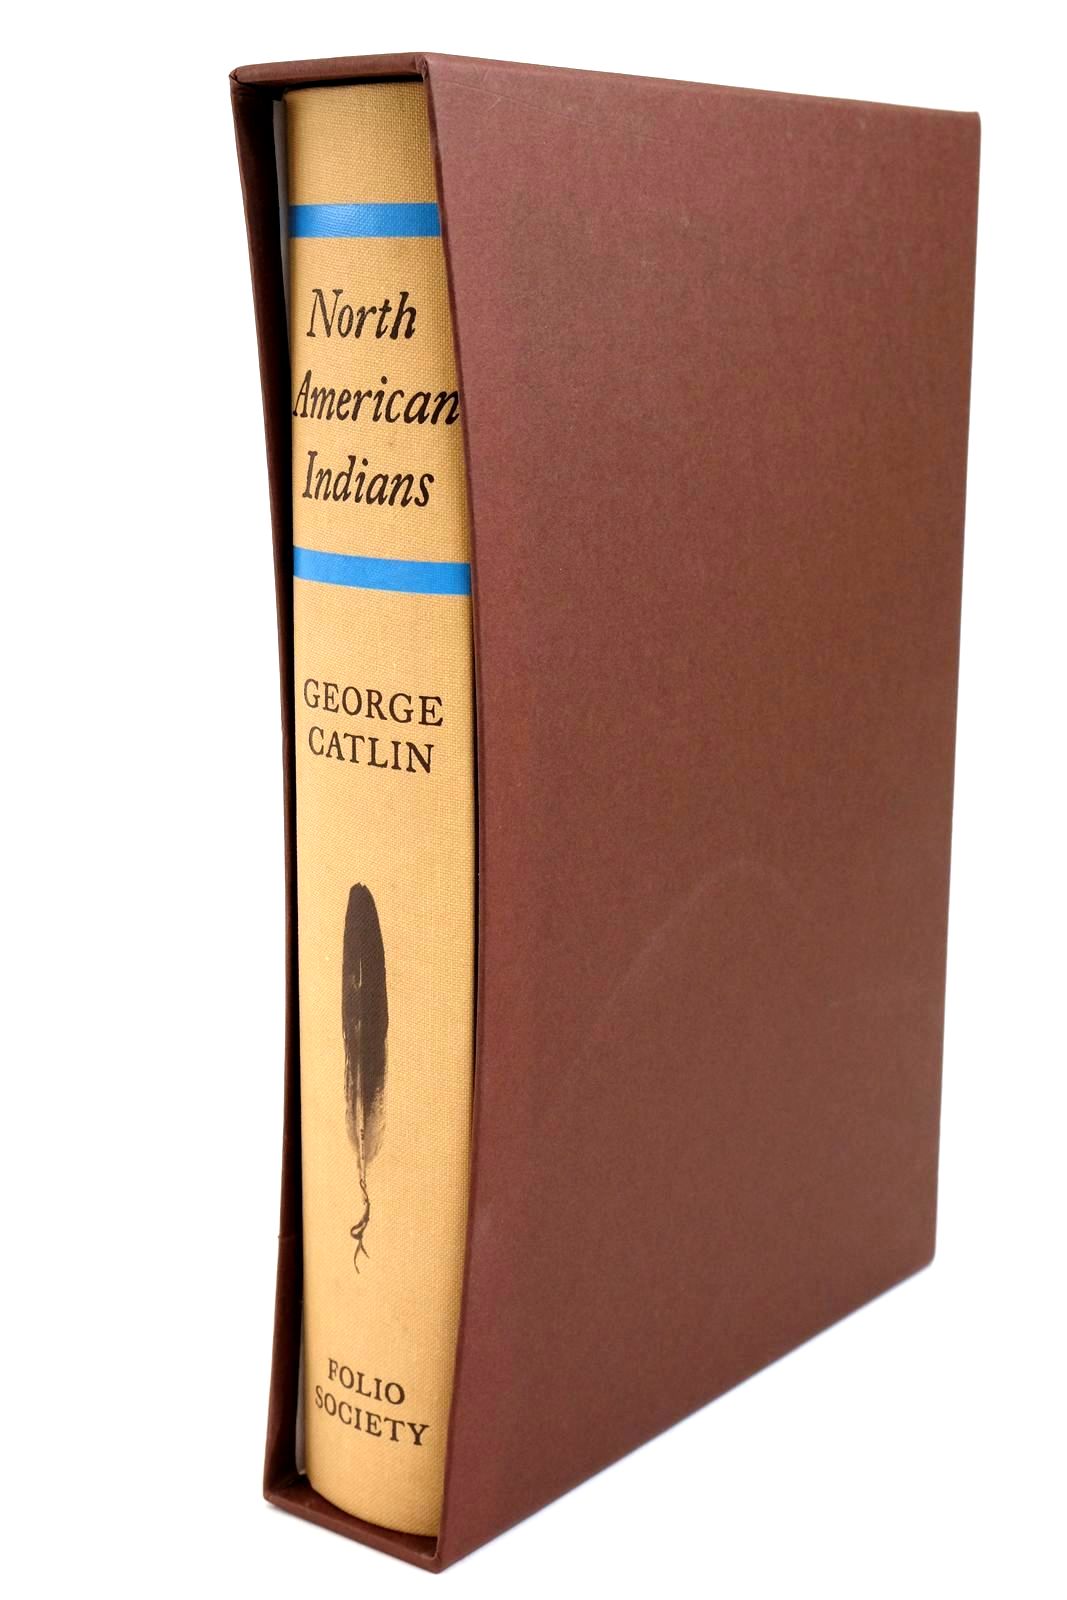 Photo of LETTERS AND NOTES ON THE MANNERS, CUSTOMS AND CONDITION OF THE NORTH AMERICAN INDIANS written by Catlin, George
Matthiessen, Peter
Shepherd, C.J. published by Folio Society (STOCK CODE: 1321825)  for sale by Stella & Rose's Books